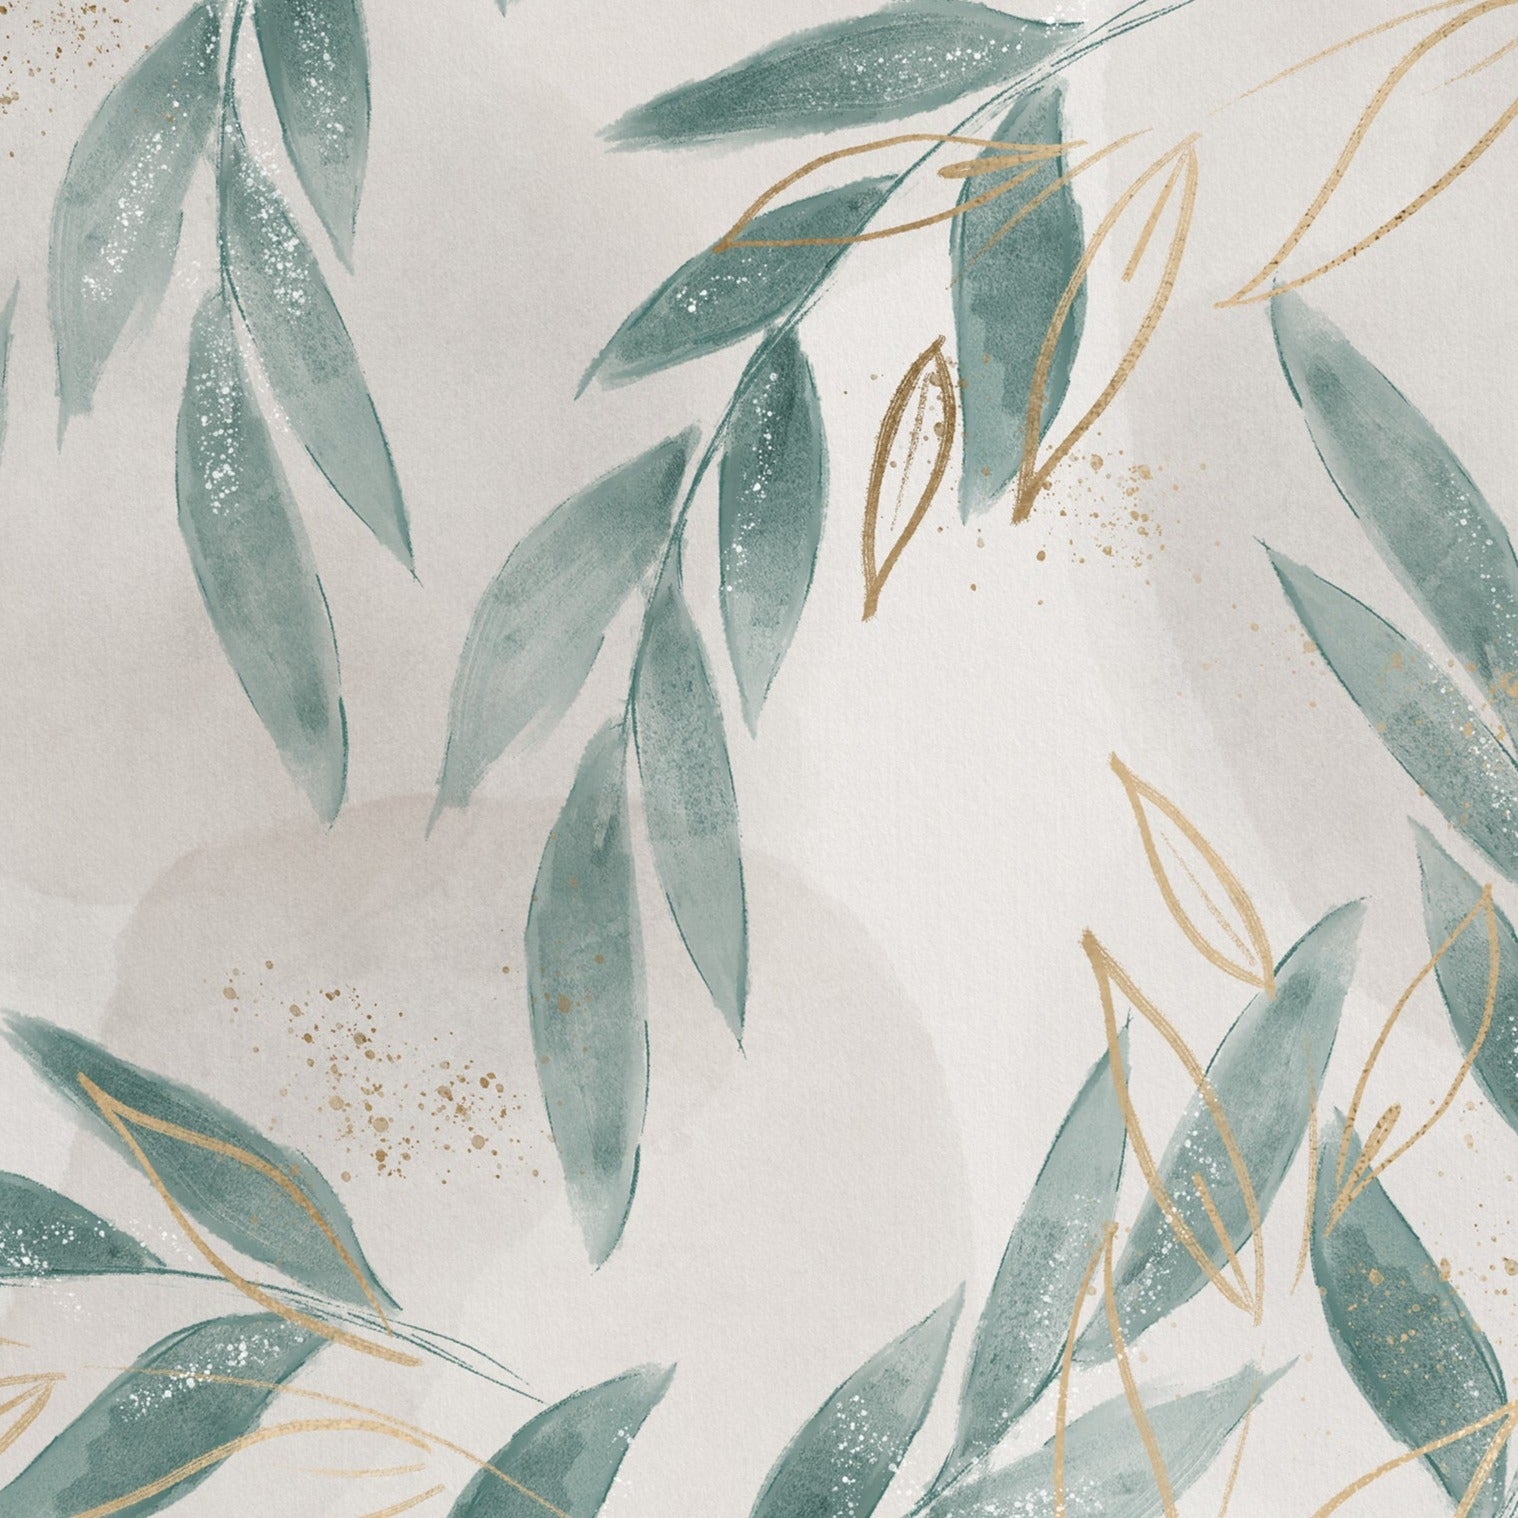 Elegant Shimmering Floral Wallpaper featuring a soft, watercolor design of teal and golden leaves scattered across a textured beige background, adding a luxurious touch to home decor